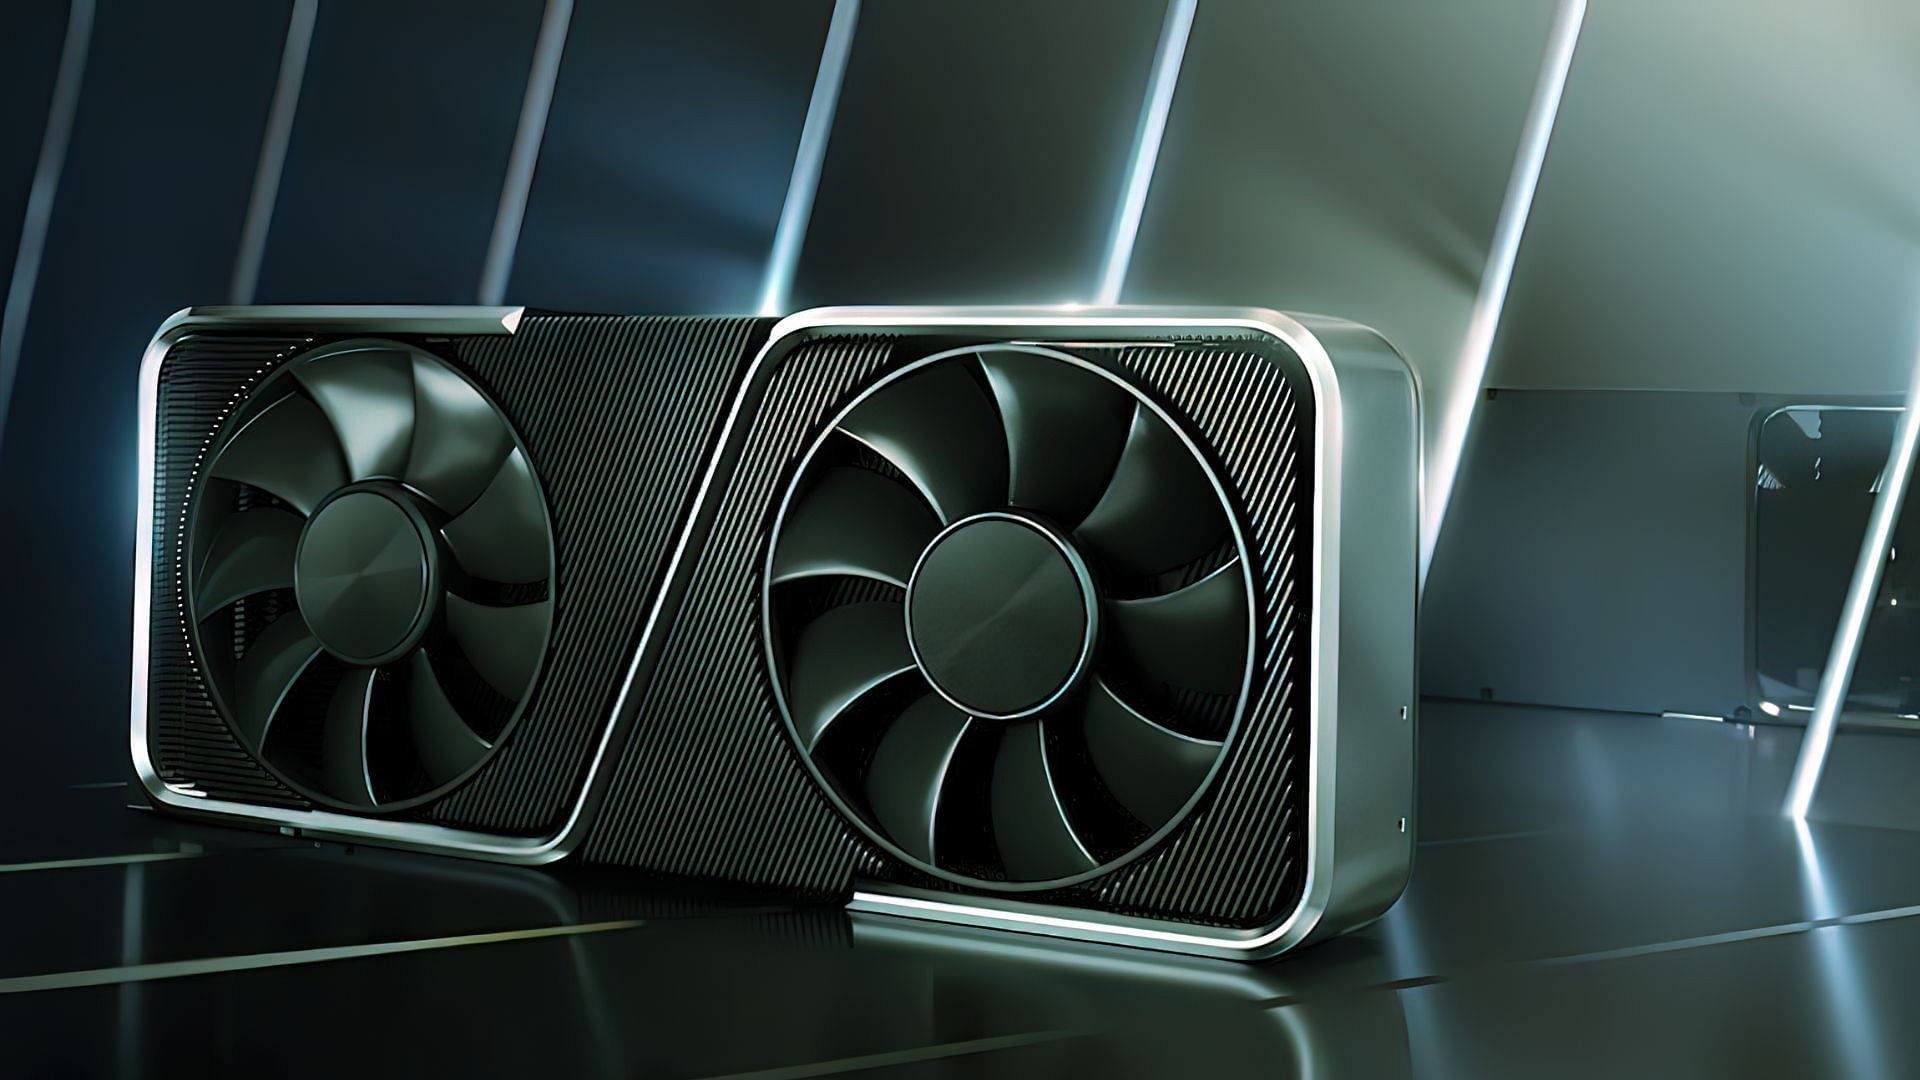 Nvidia GeForce RTX 4060: the best midrange graphics card for the masses